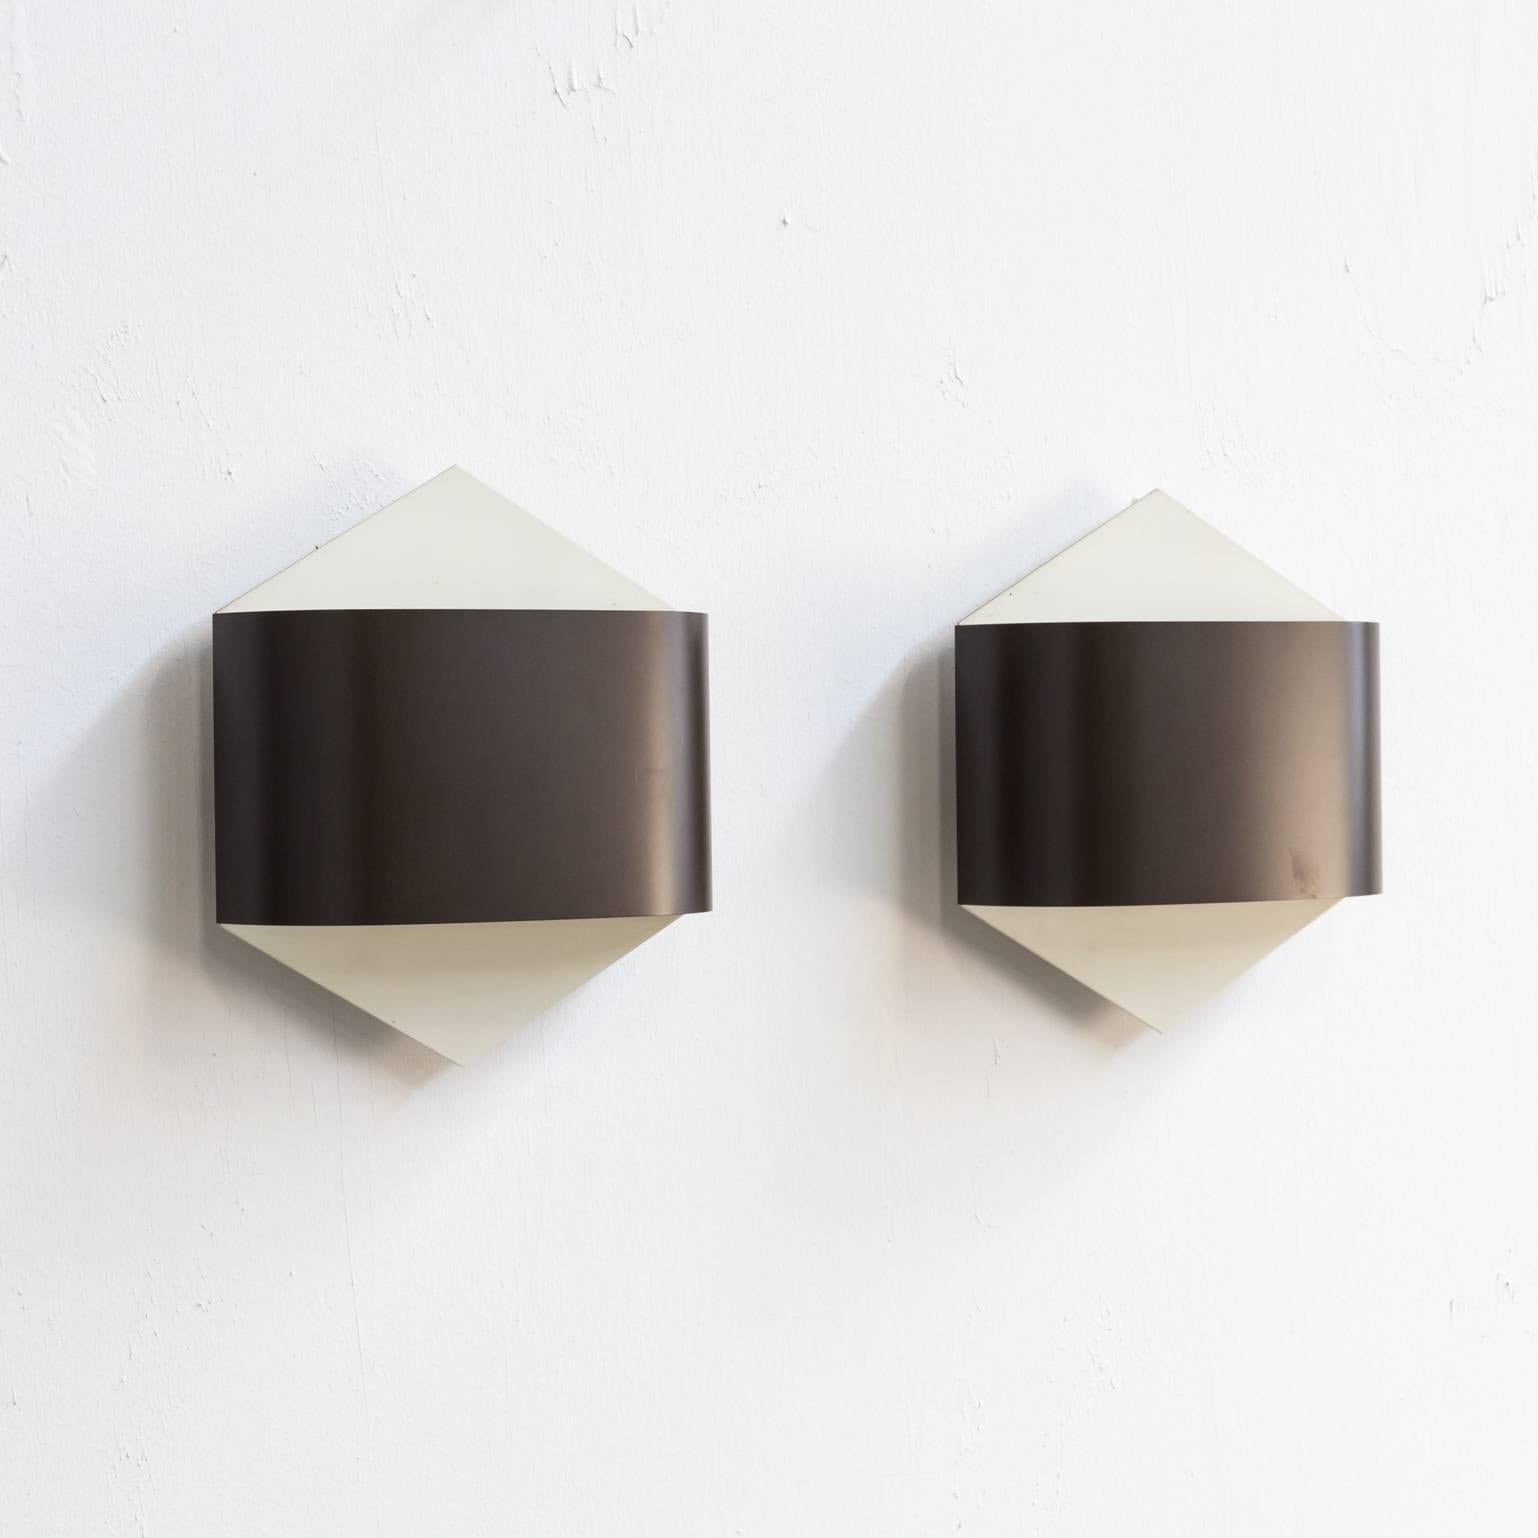 20th Century 1960s Rolf Krüger & Dieter Witte Wall Sconces by Staff Germany, Set of Two For Sale